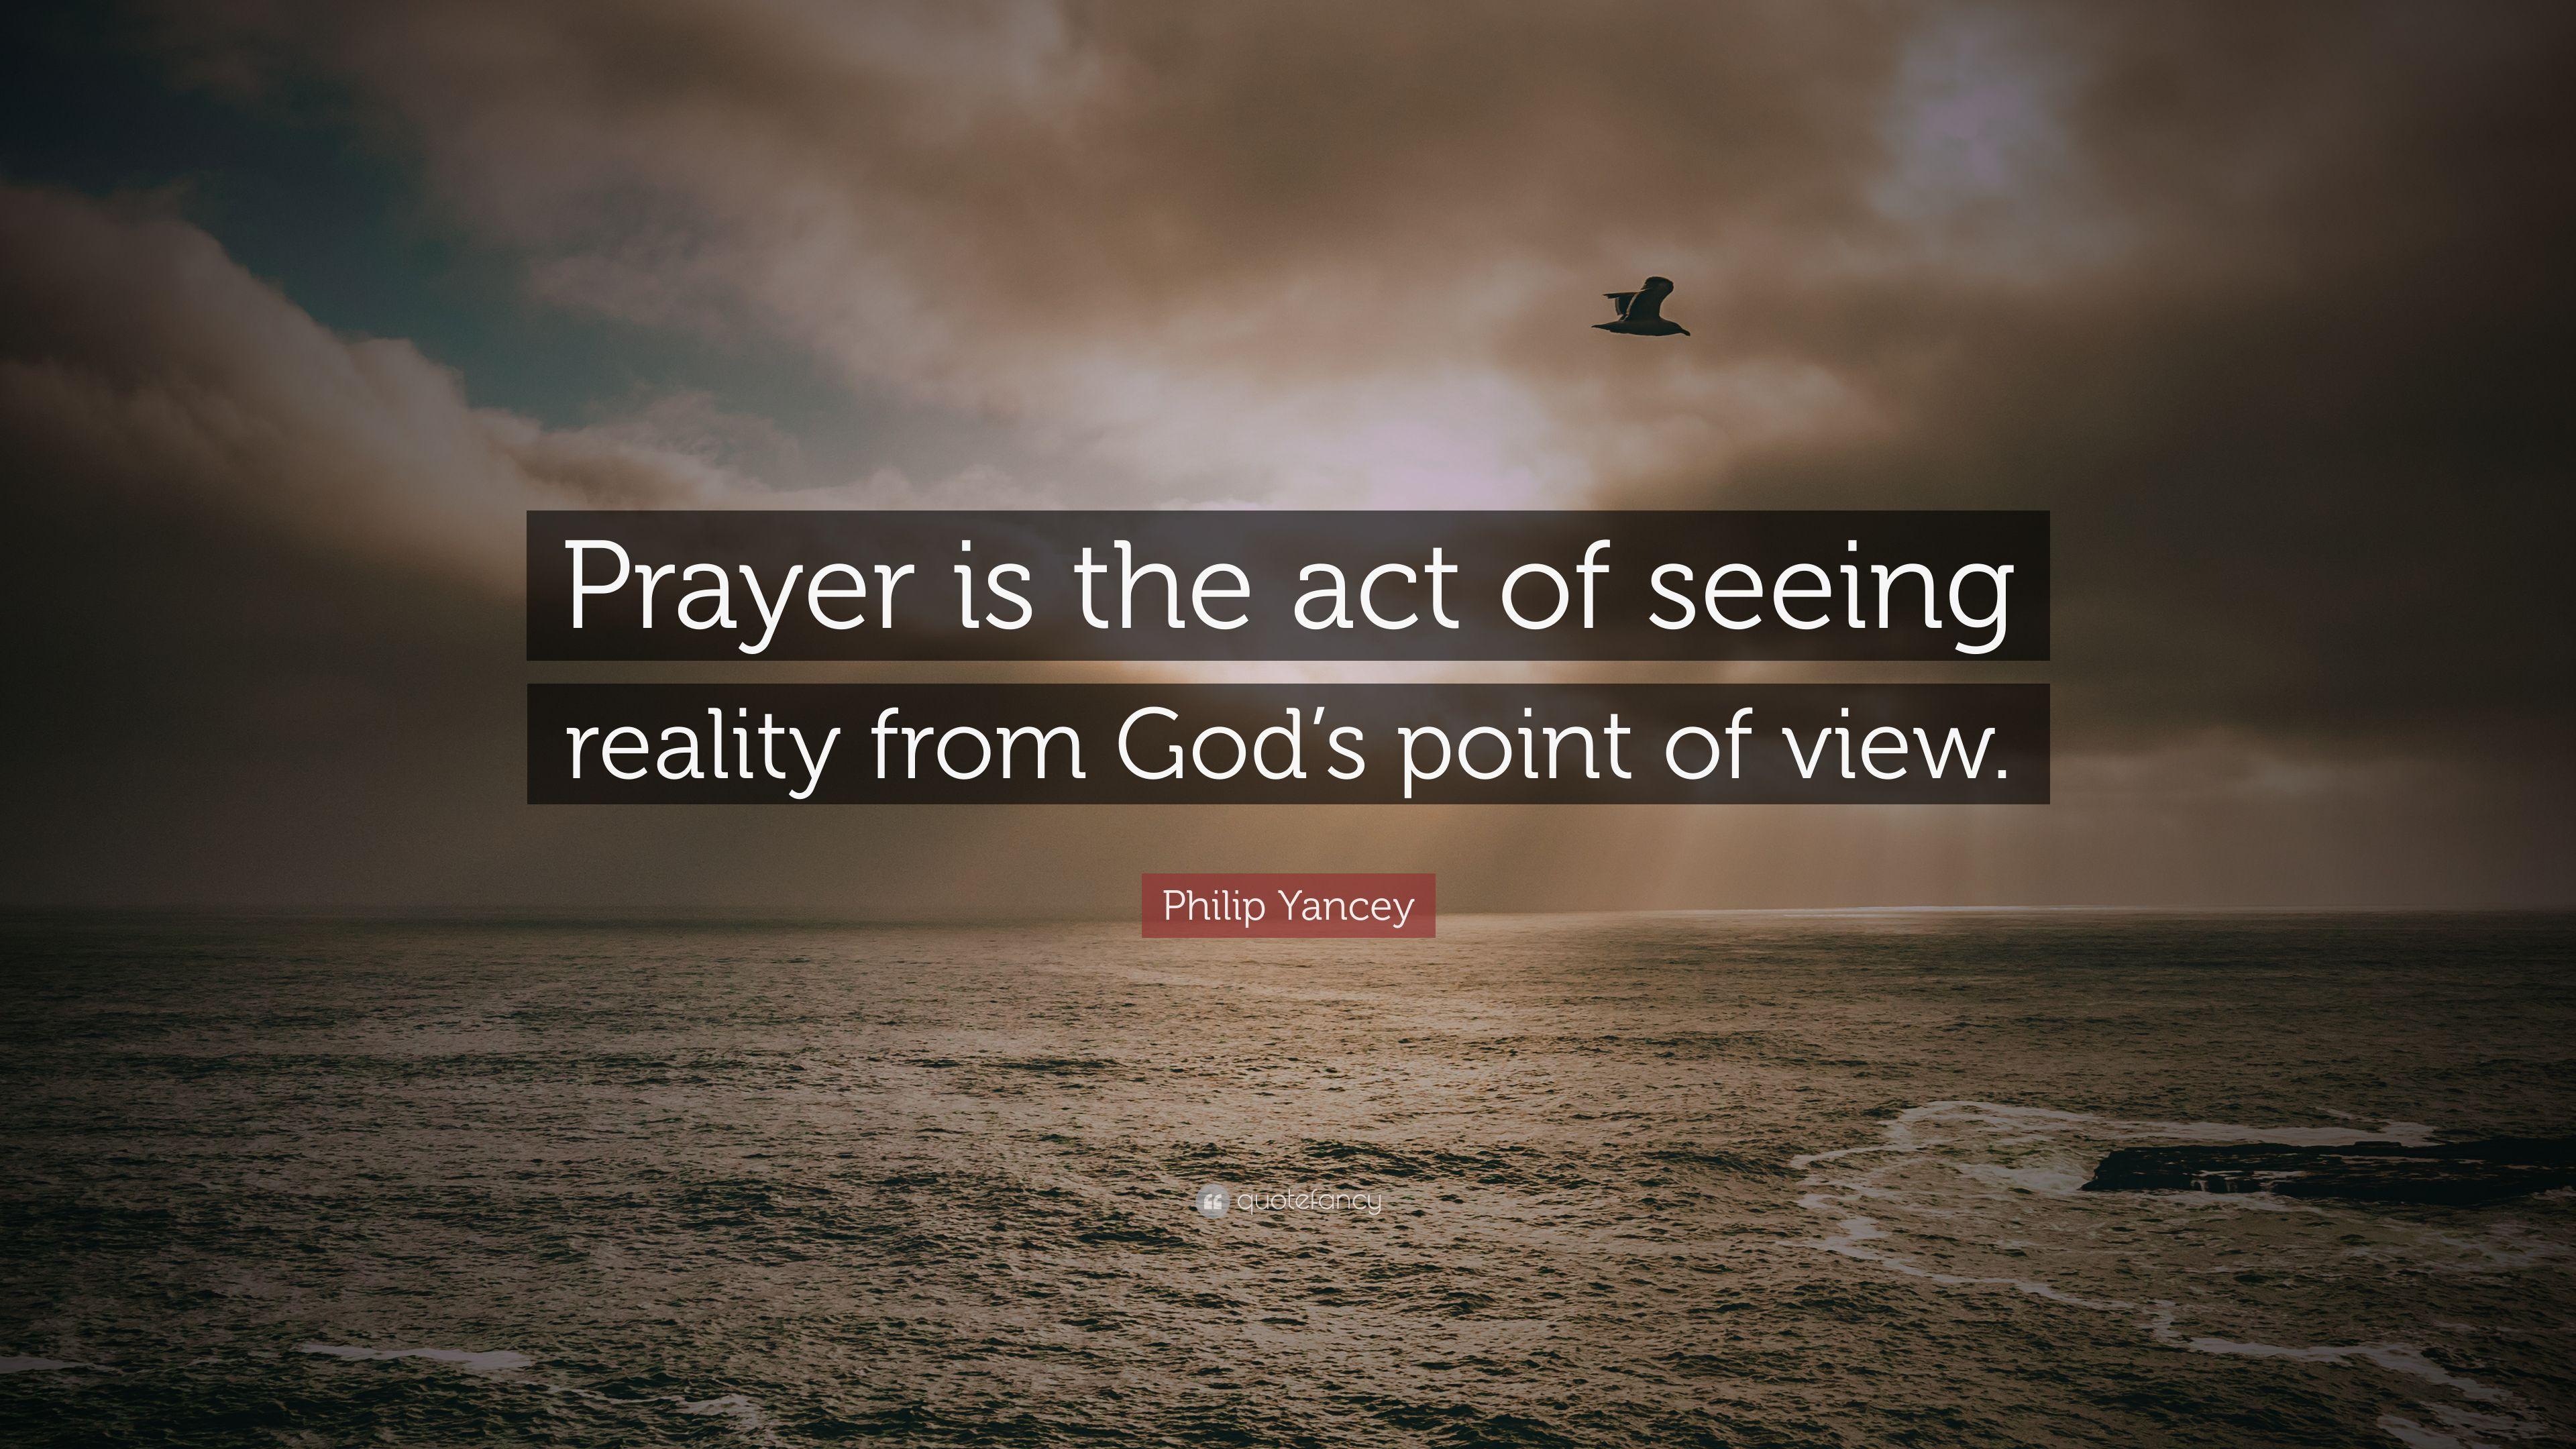 Philip Yancey Quote: “Prayer is the act of seeing reality from God's